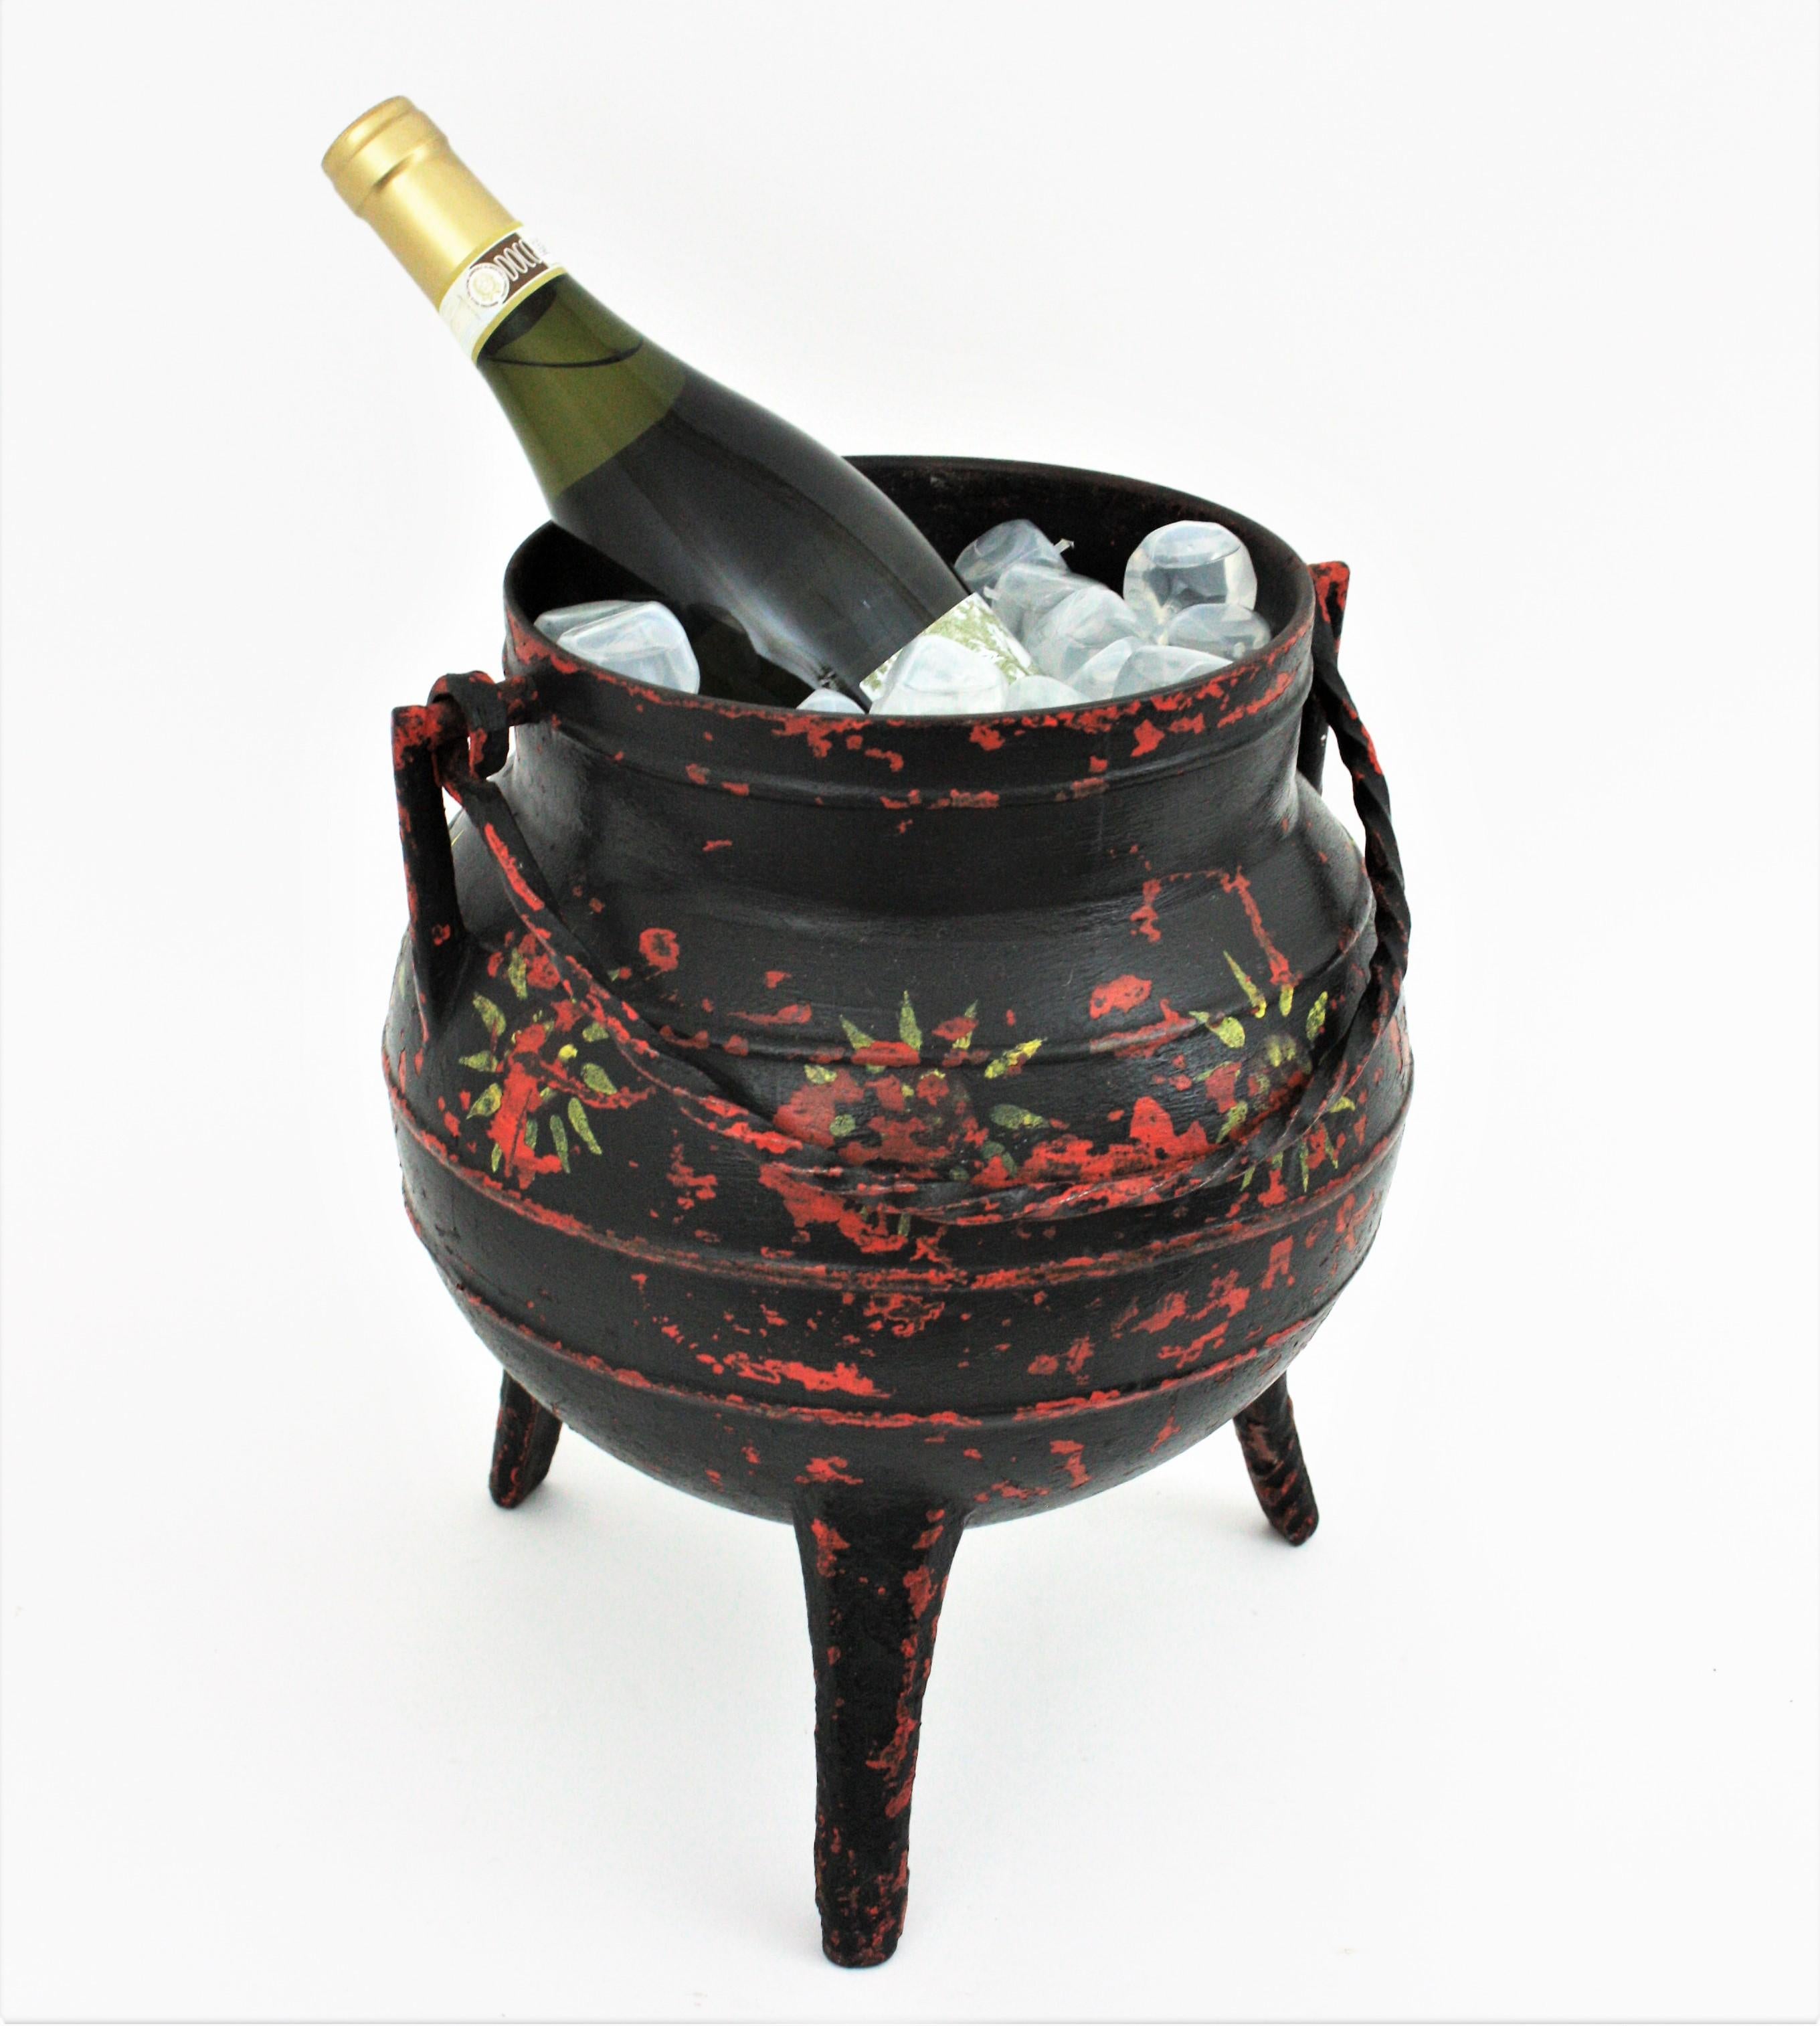 Spanish Folk Hand-Painted Ice Bucket or Wine Champagne Cooler For Sale 1